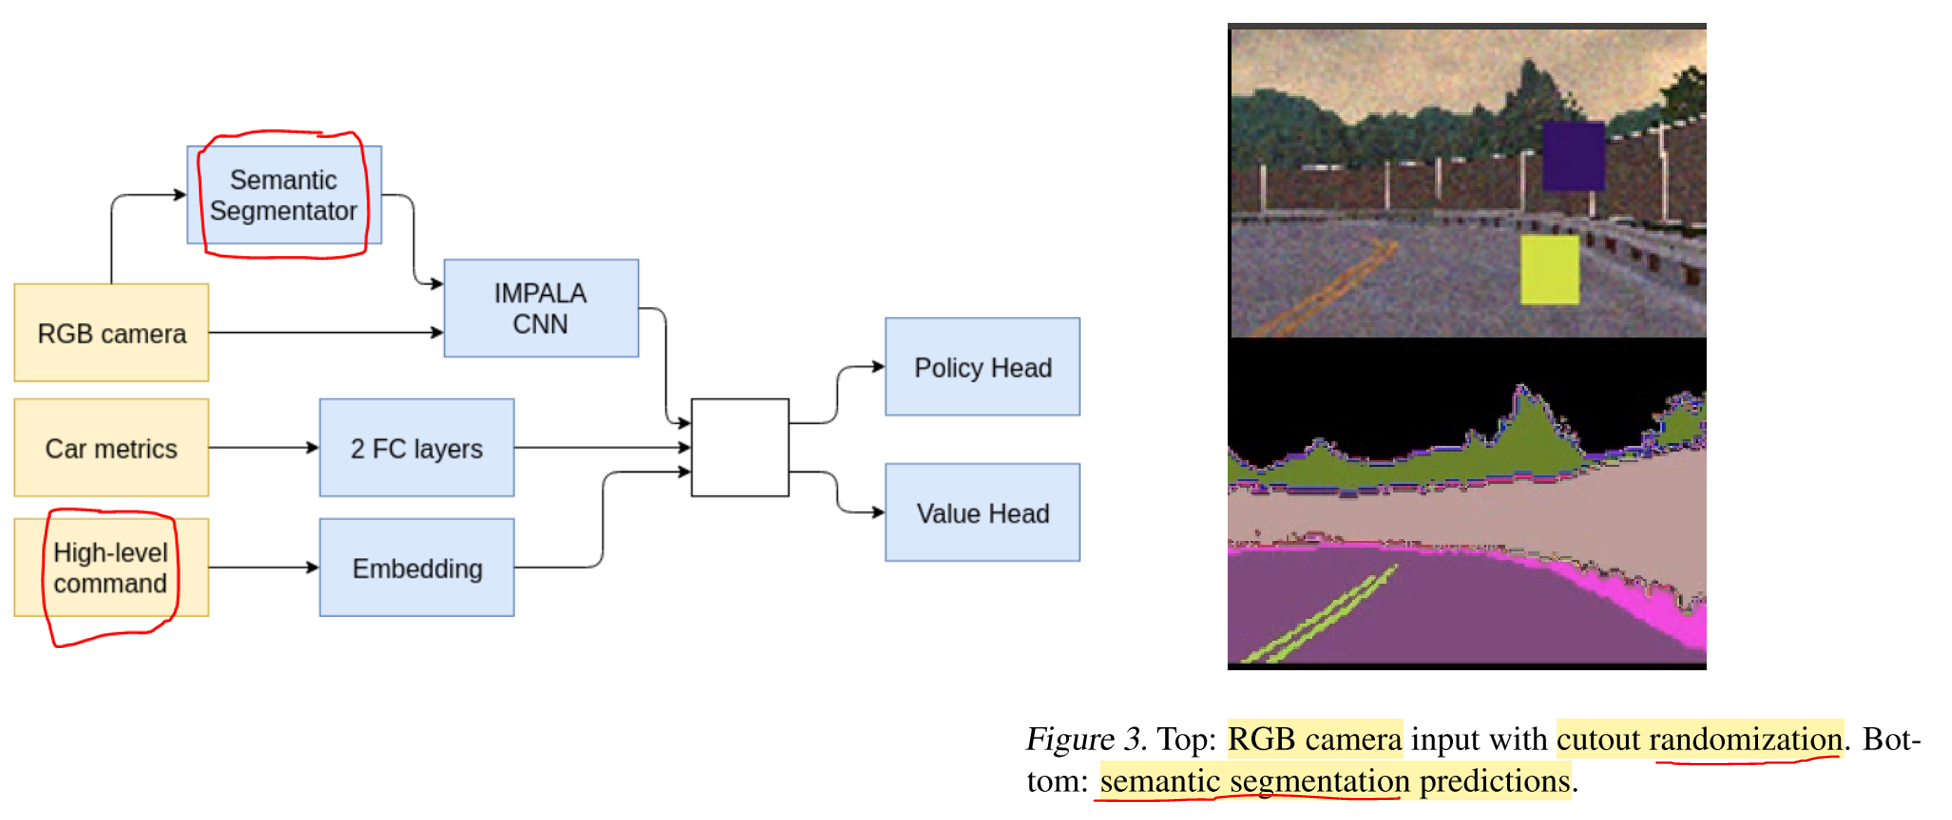 Neural architecture of the policy function trained with PPO: the RGB image is concatenated with its semantic segmentation. Randomisation is performed to prevent over-fitting and increase sampling-efficiency. It is also worth mentioning the high-level navigation command that is provided to guide the agent when approaching intersections. Source.